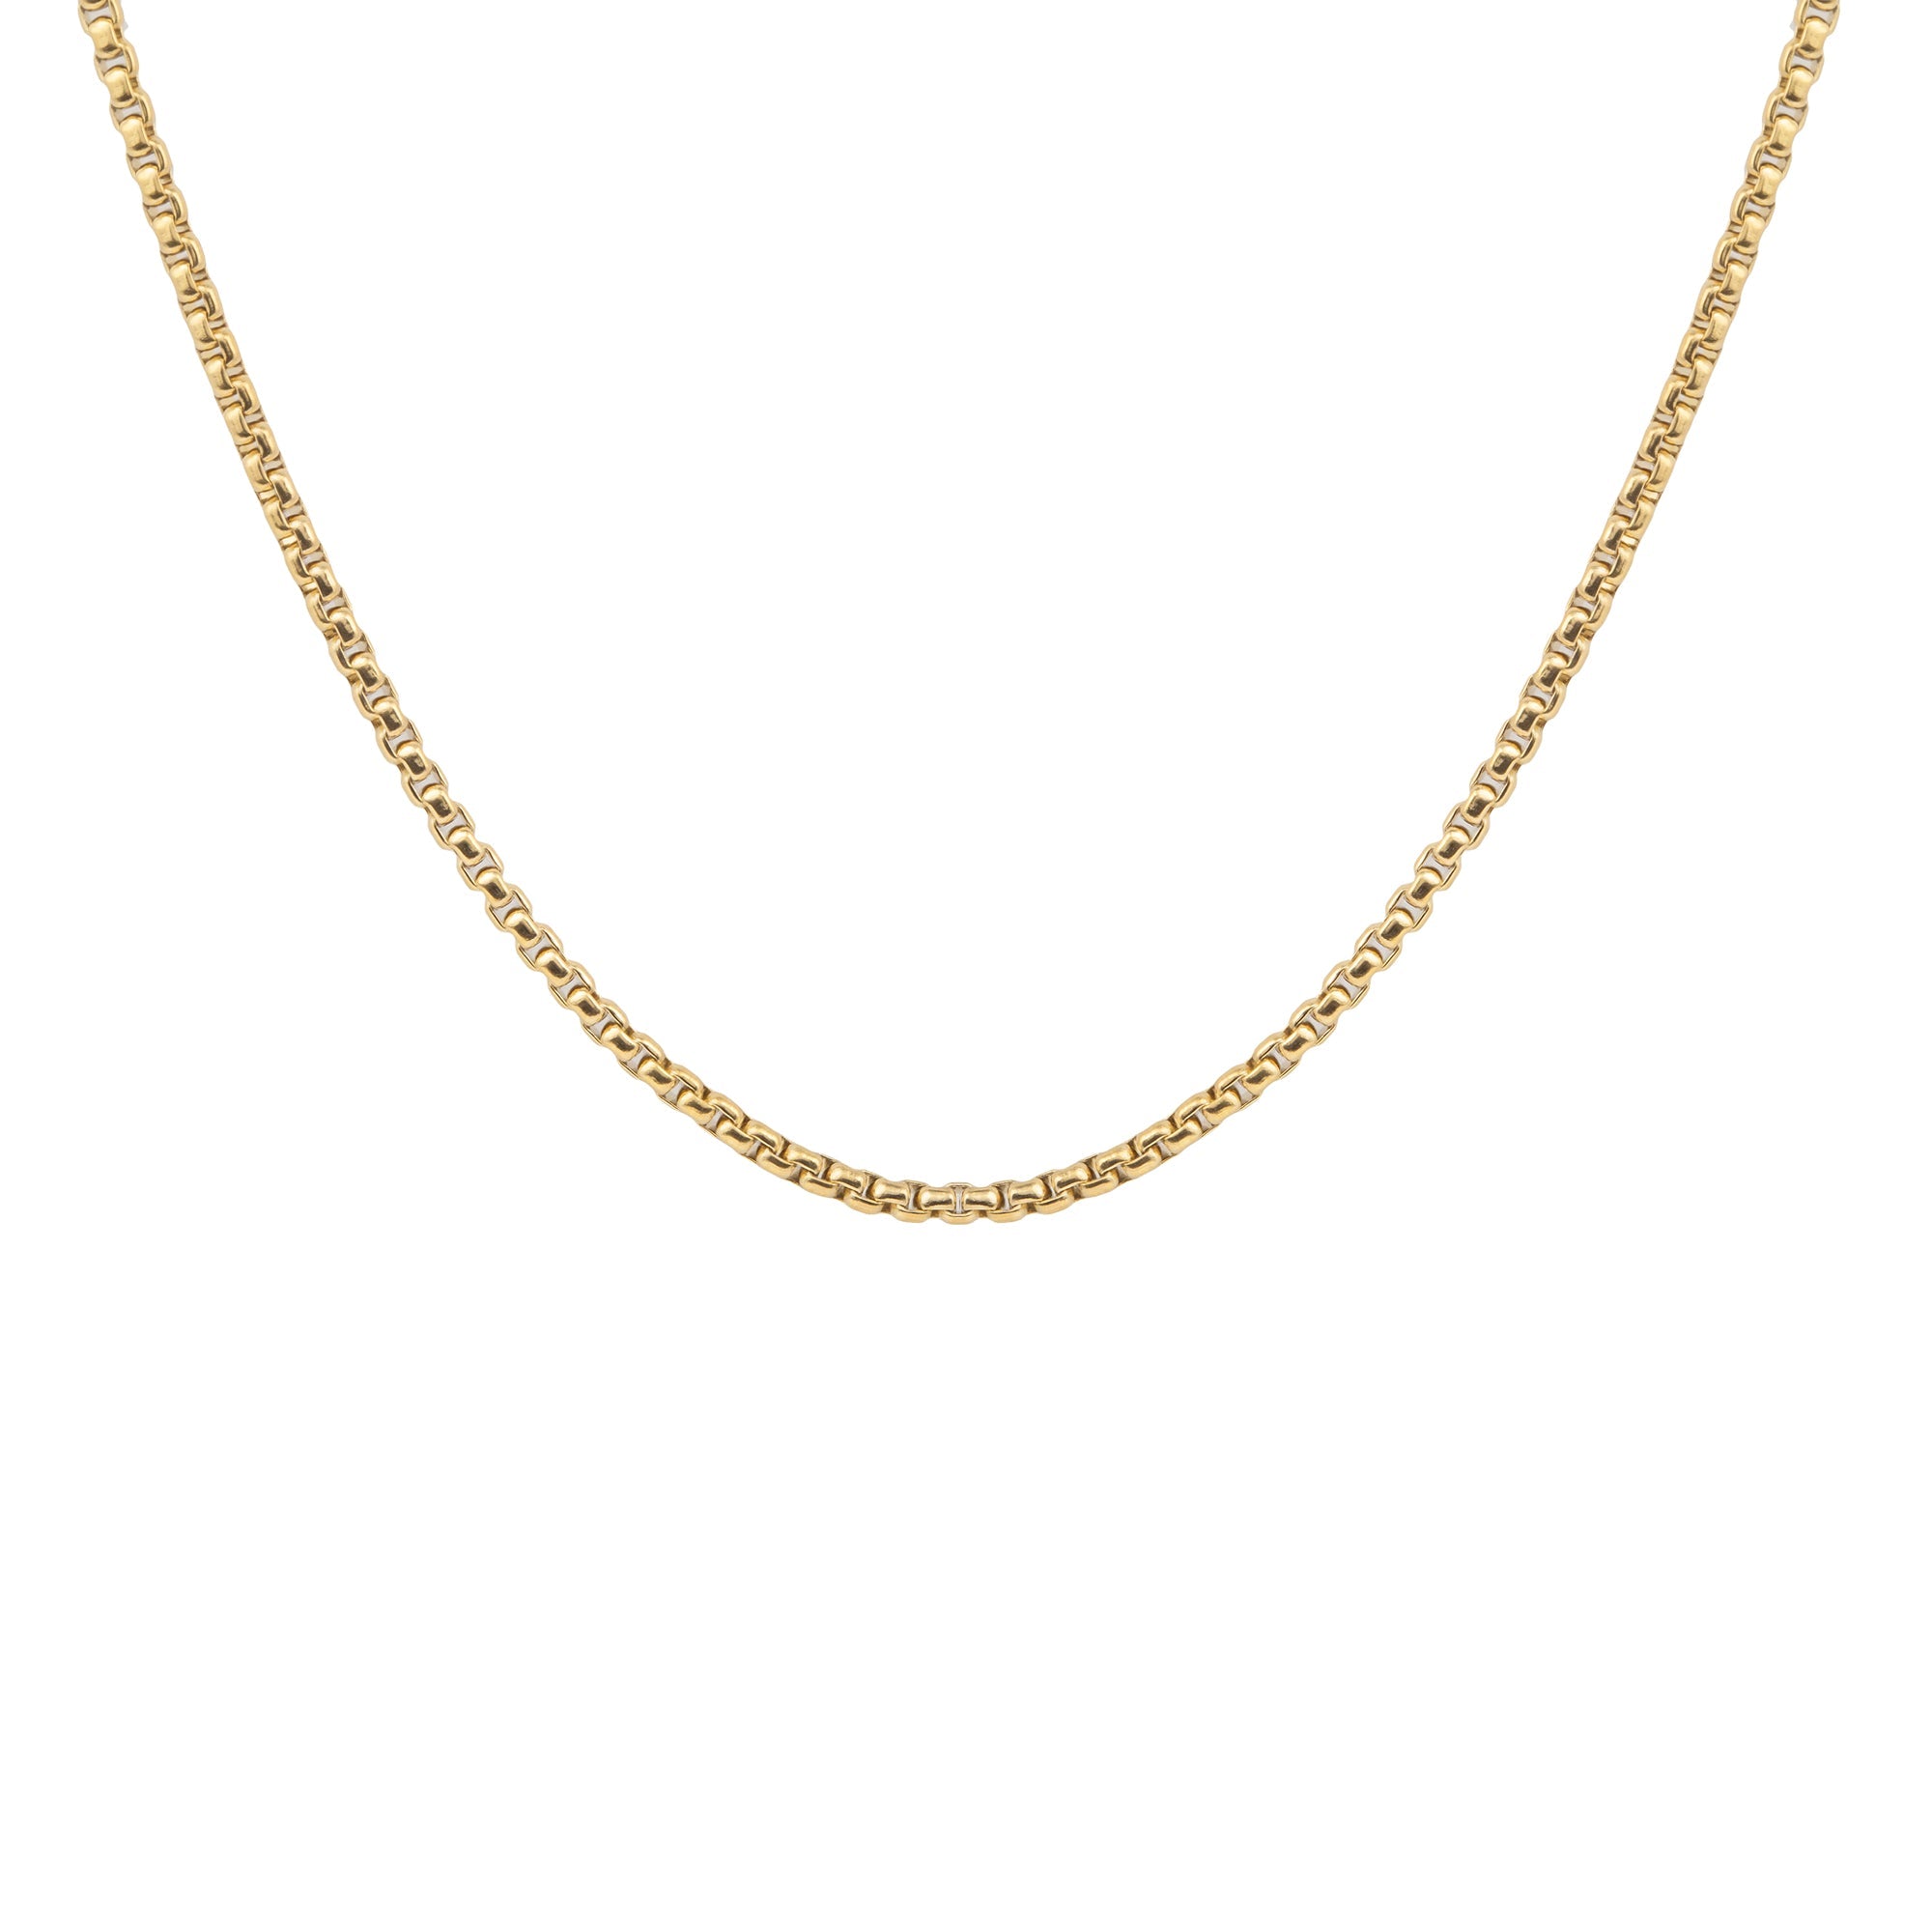 The Lily Box Chain NecklaceBy Rae Jewellery